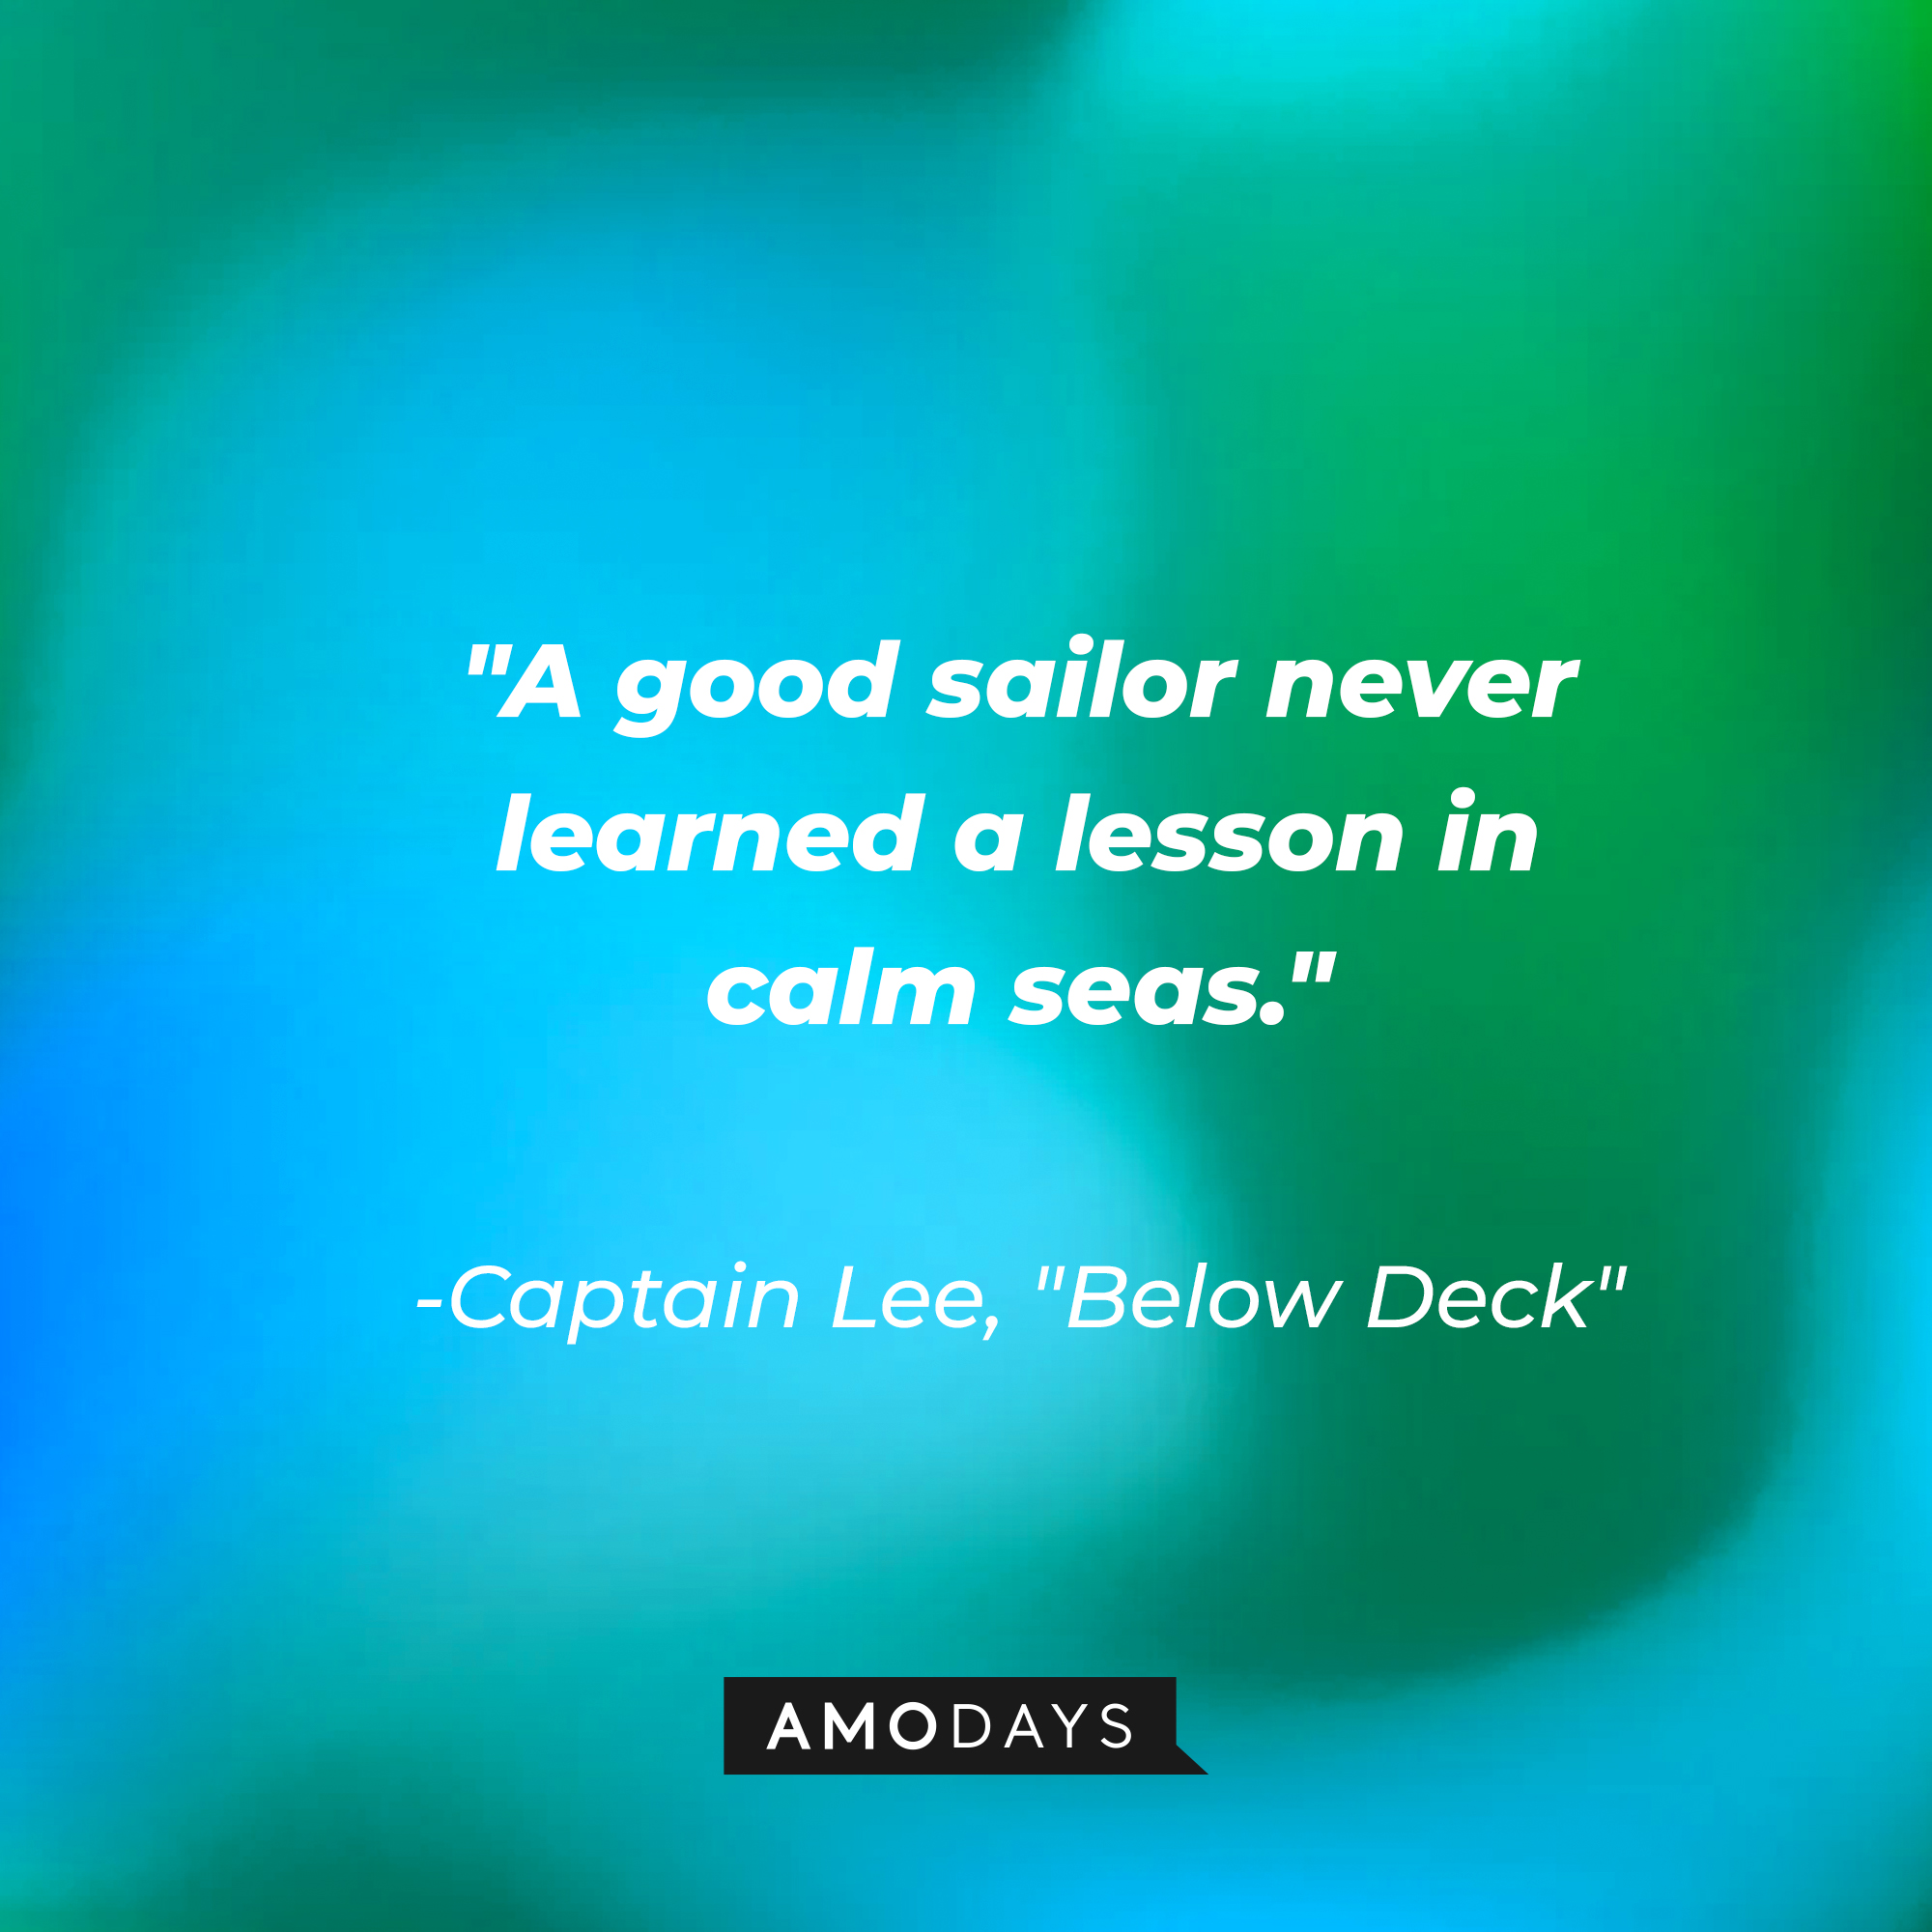 Captain Lee's quote from "Below Deck:" "A good sailor never learned a lesson in calm seas." | Source: AmoDays